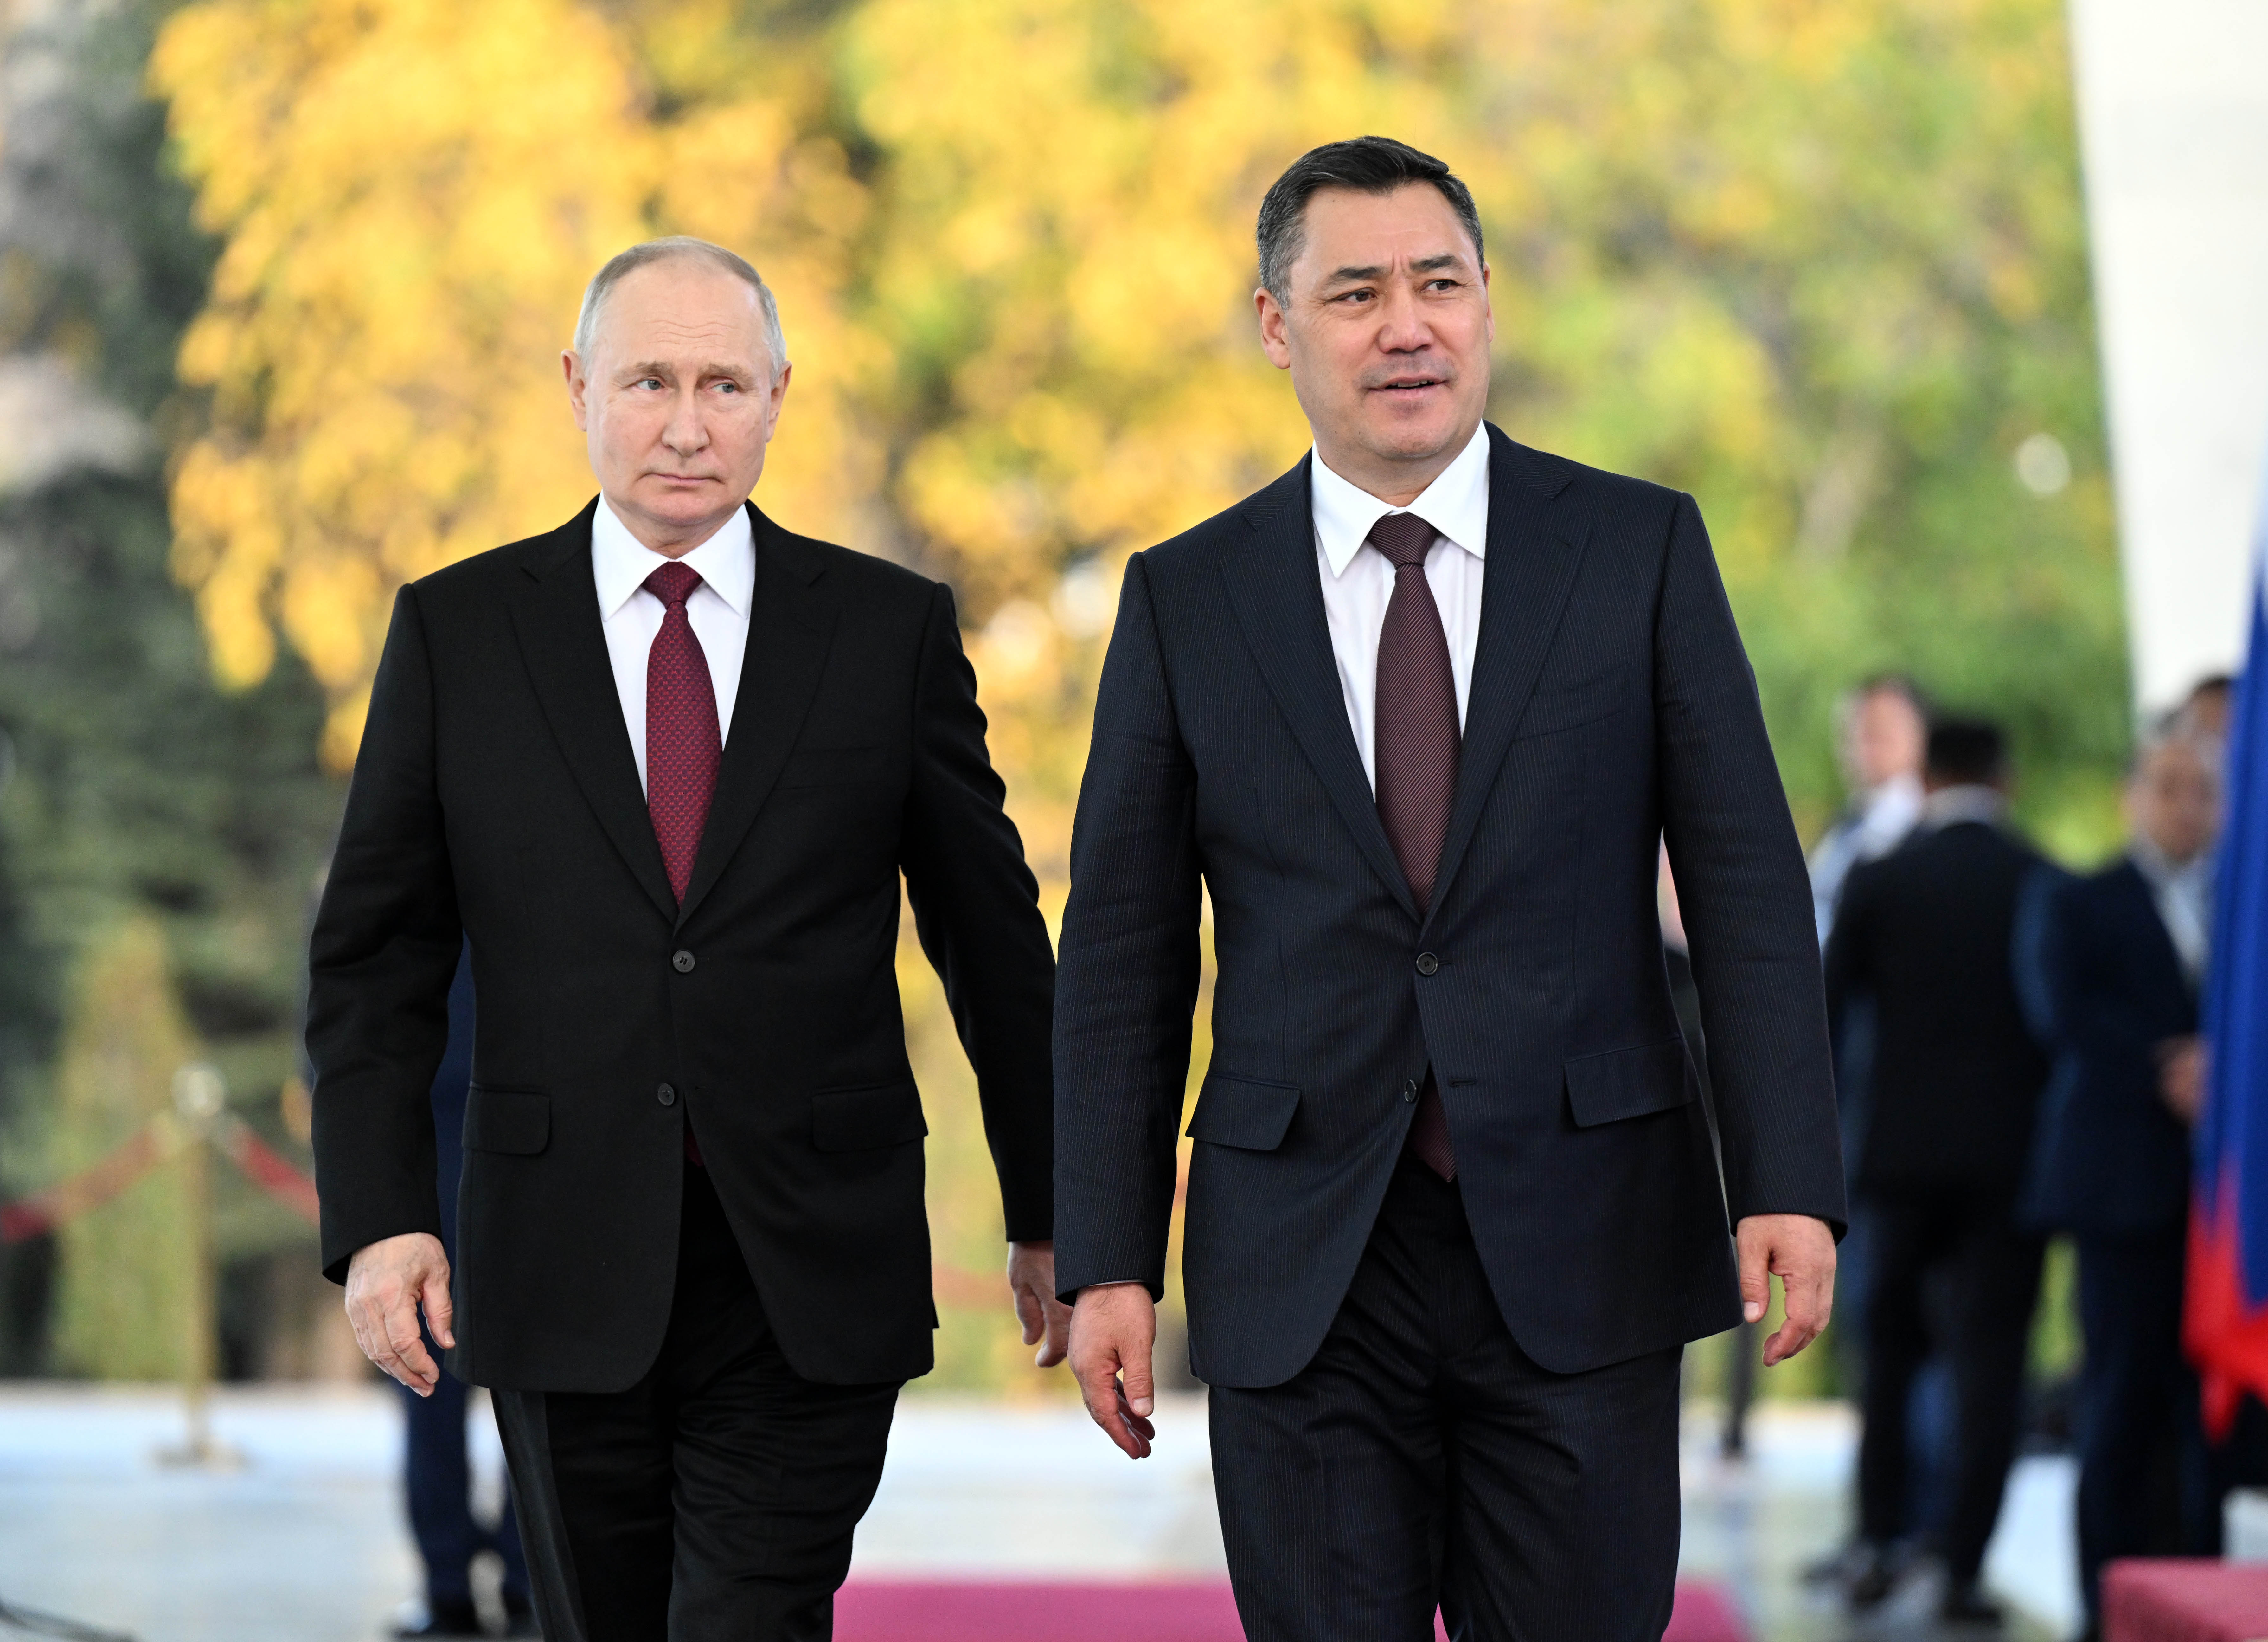 Kyrgyz president extends warm congratulations to Russian military base on 20th anniversary 